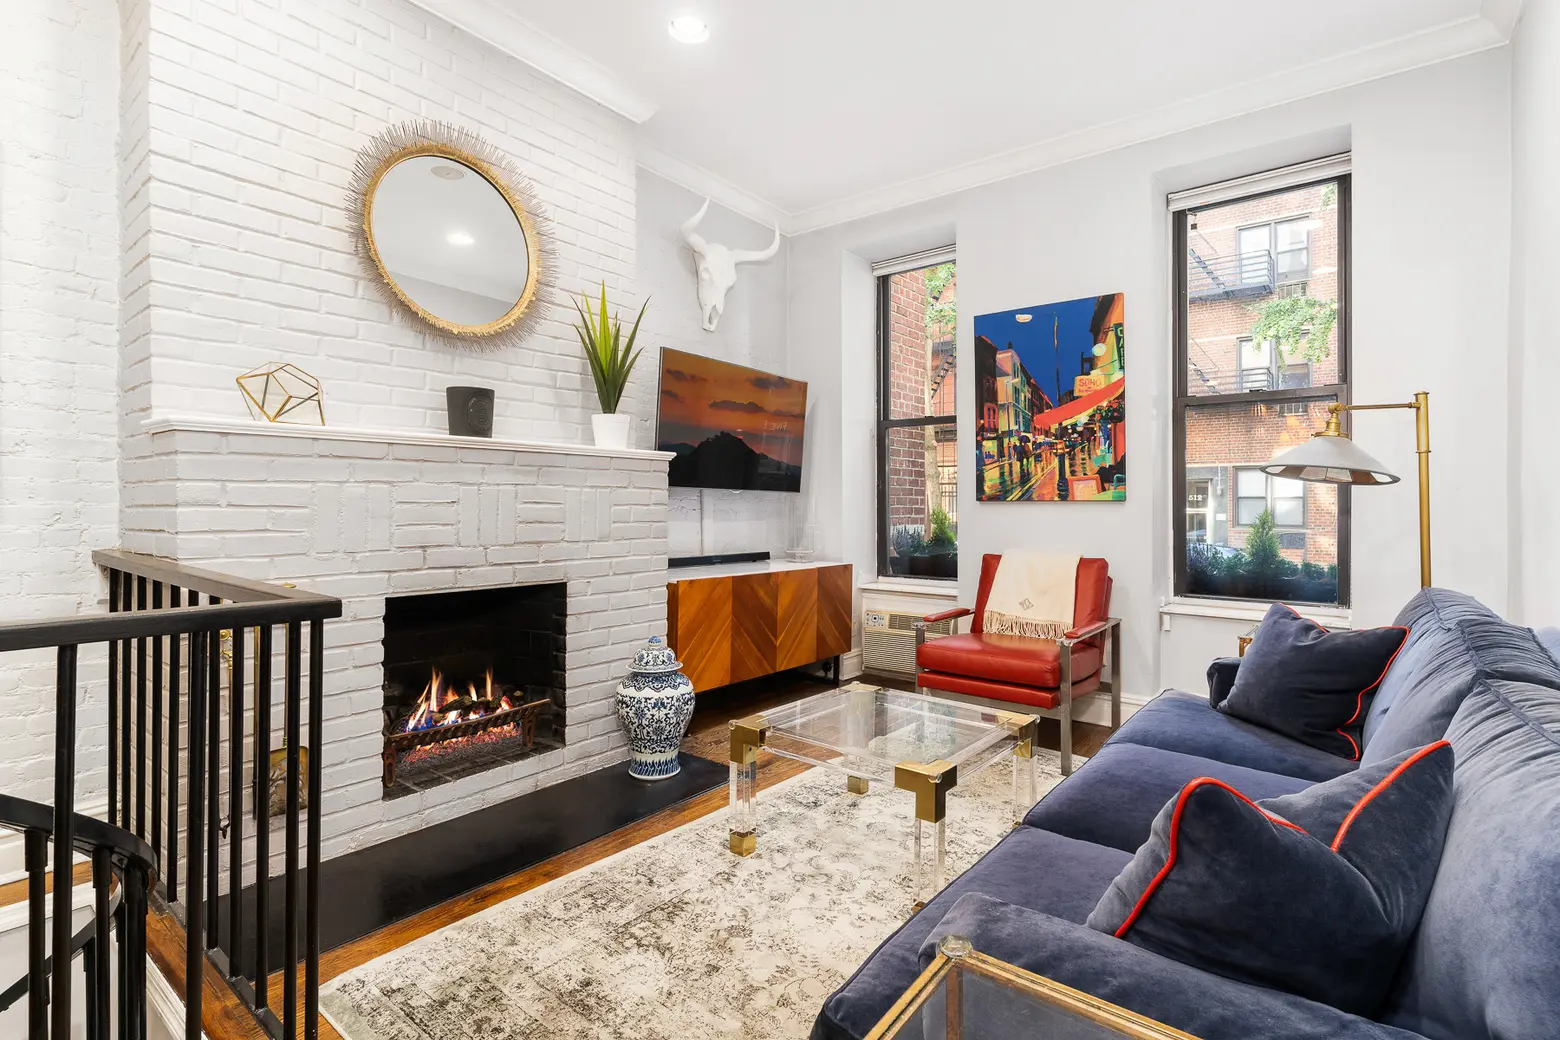 This $1.3M Yorkville duplex is classy, sassy, and perfect for a small family